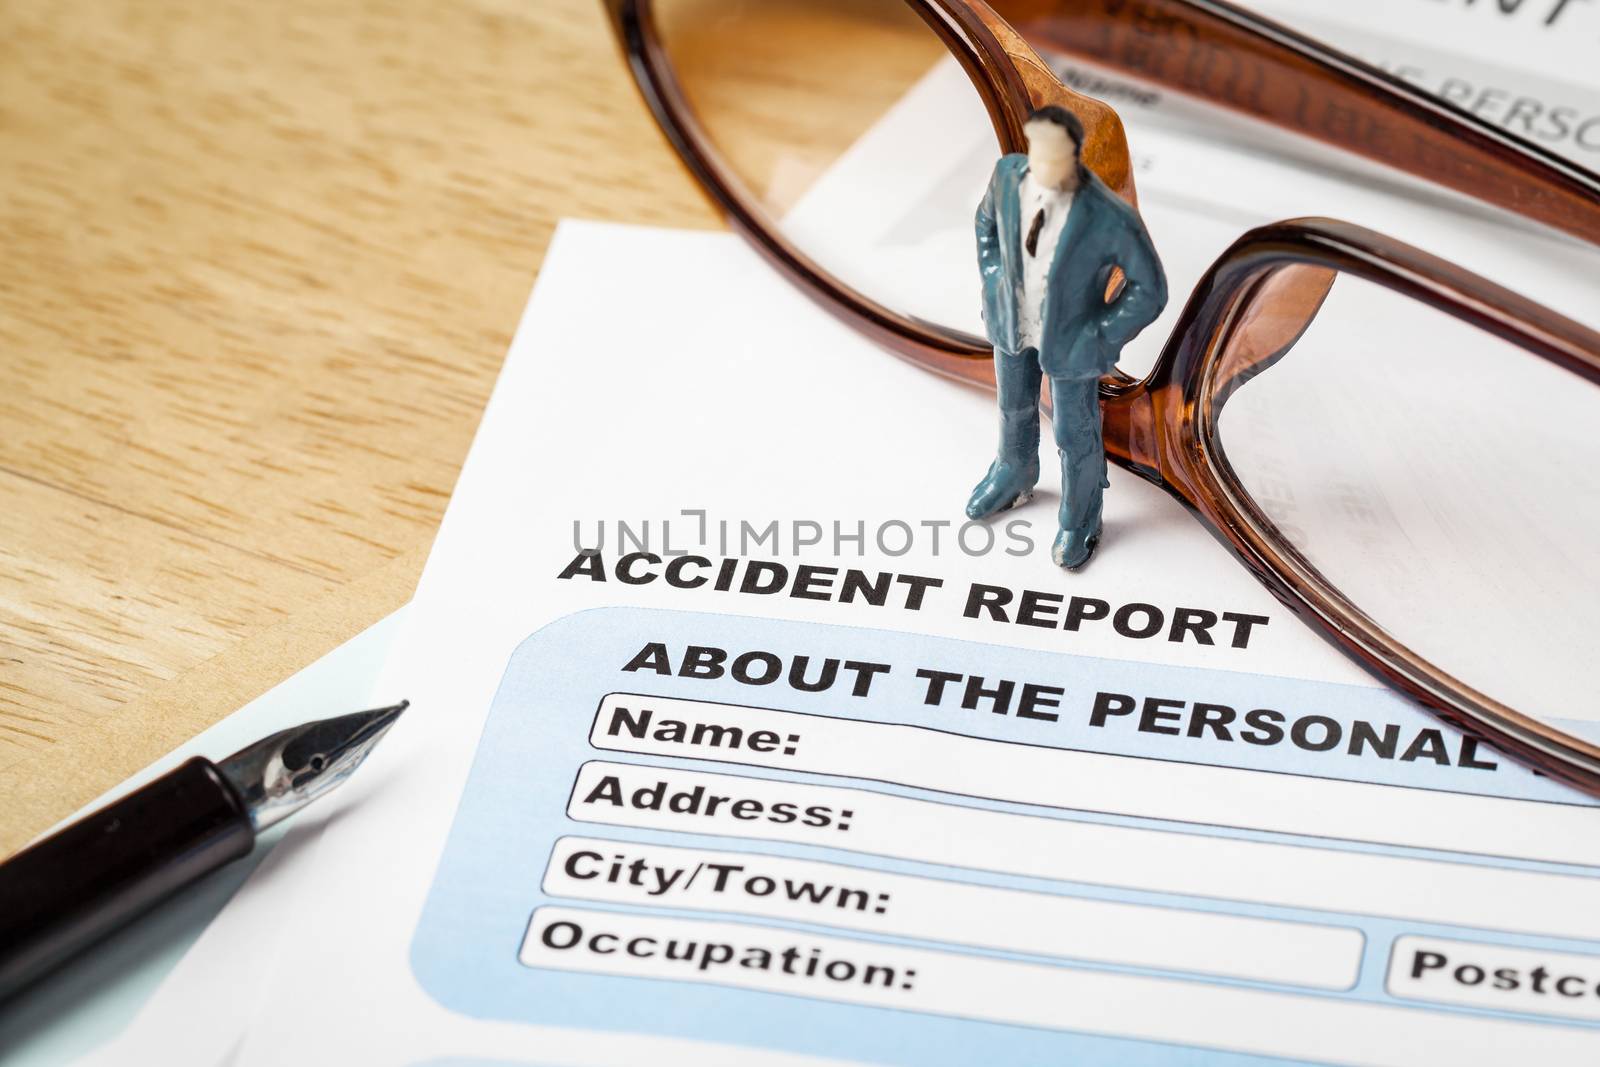 Accident report application form and businessman with pen and ey by FrameAngel